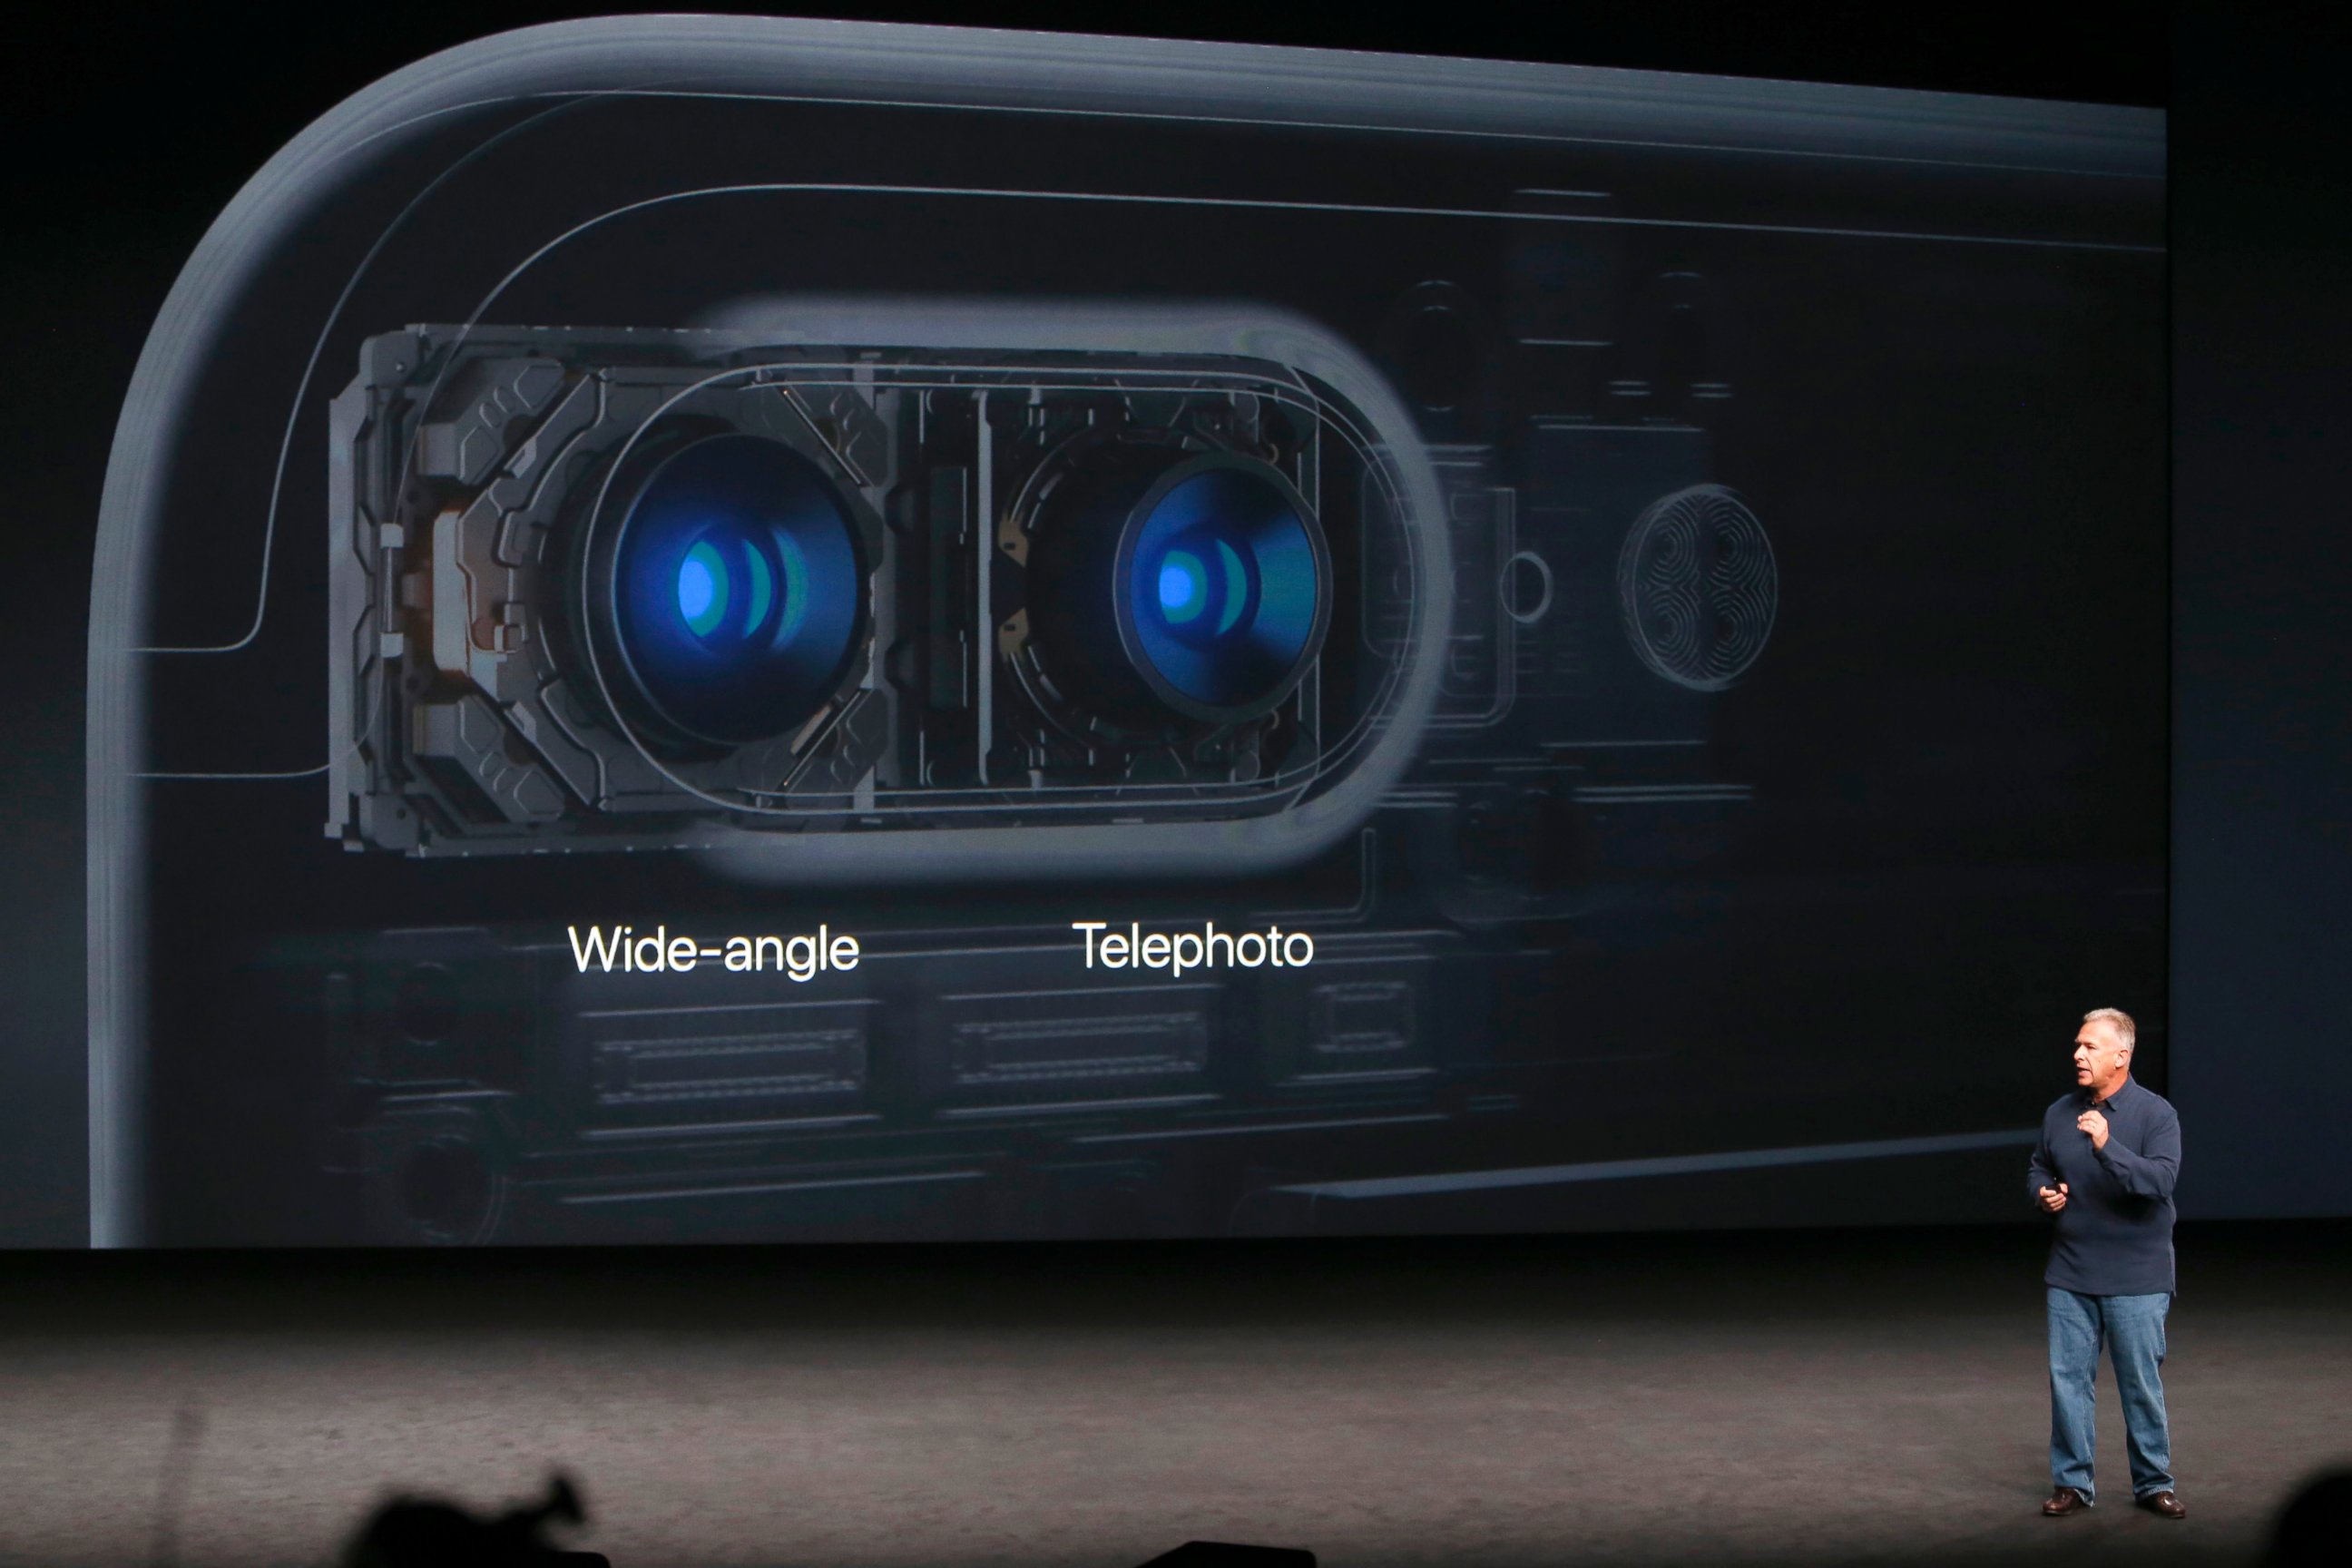 PHOTO: Phil Schiller, Senior Vice President of Worldwide Marketing at Apple Inc, discusses the camera on the iPhone7 during an Apple media event in San Francisco, Sept. 7, 2016.